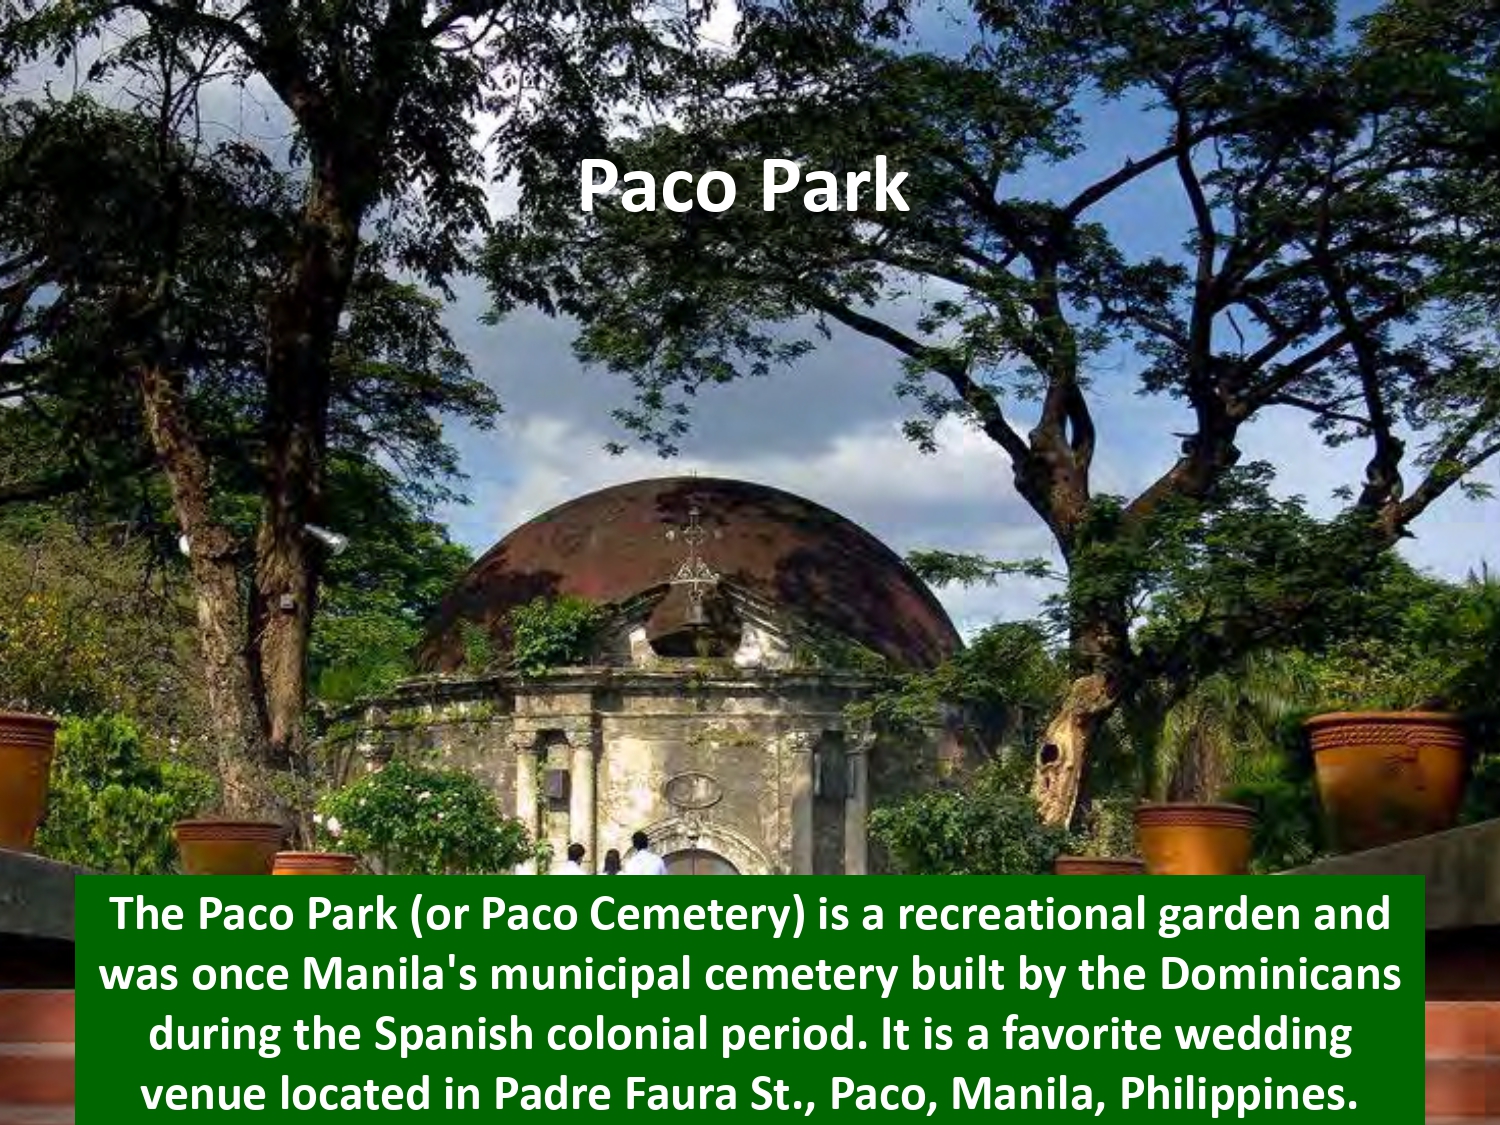 The Paco Park (or Paco Cemetery) is a recreational garden and was once Manila's municipal cemetery built by the Dominicans during the Spanish colonial period. It is a favorite wedding venue located in Padre Faura St., Paco, Manila, Philippines.